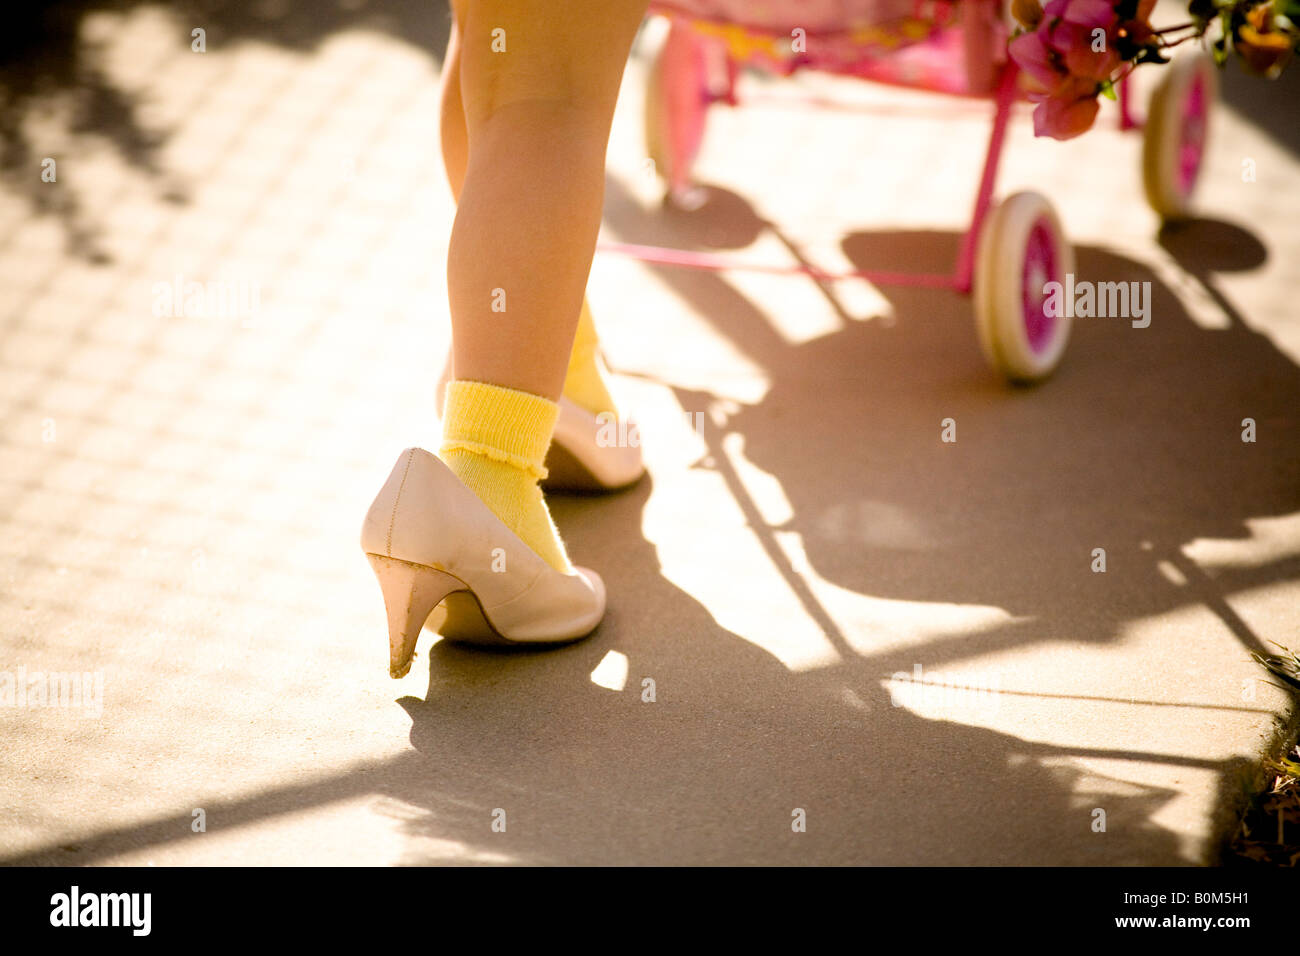 young girl walking in mom's shoes, pushing toy baby stroller, color, close up shoes and leg Stock Photo